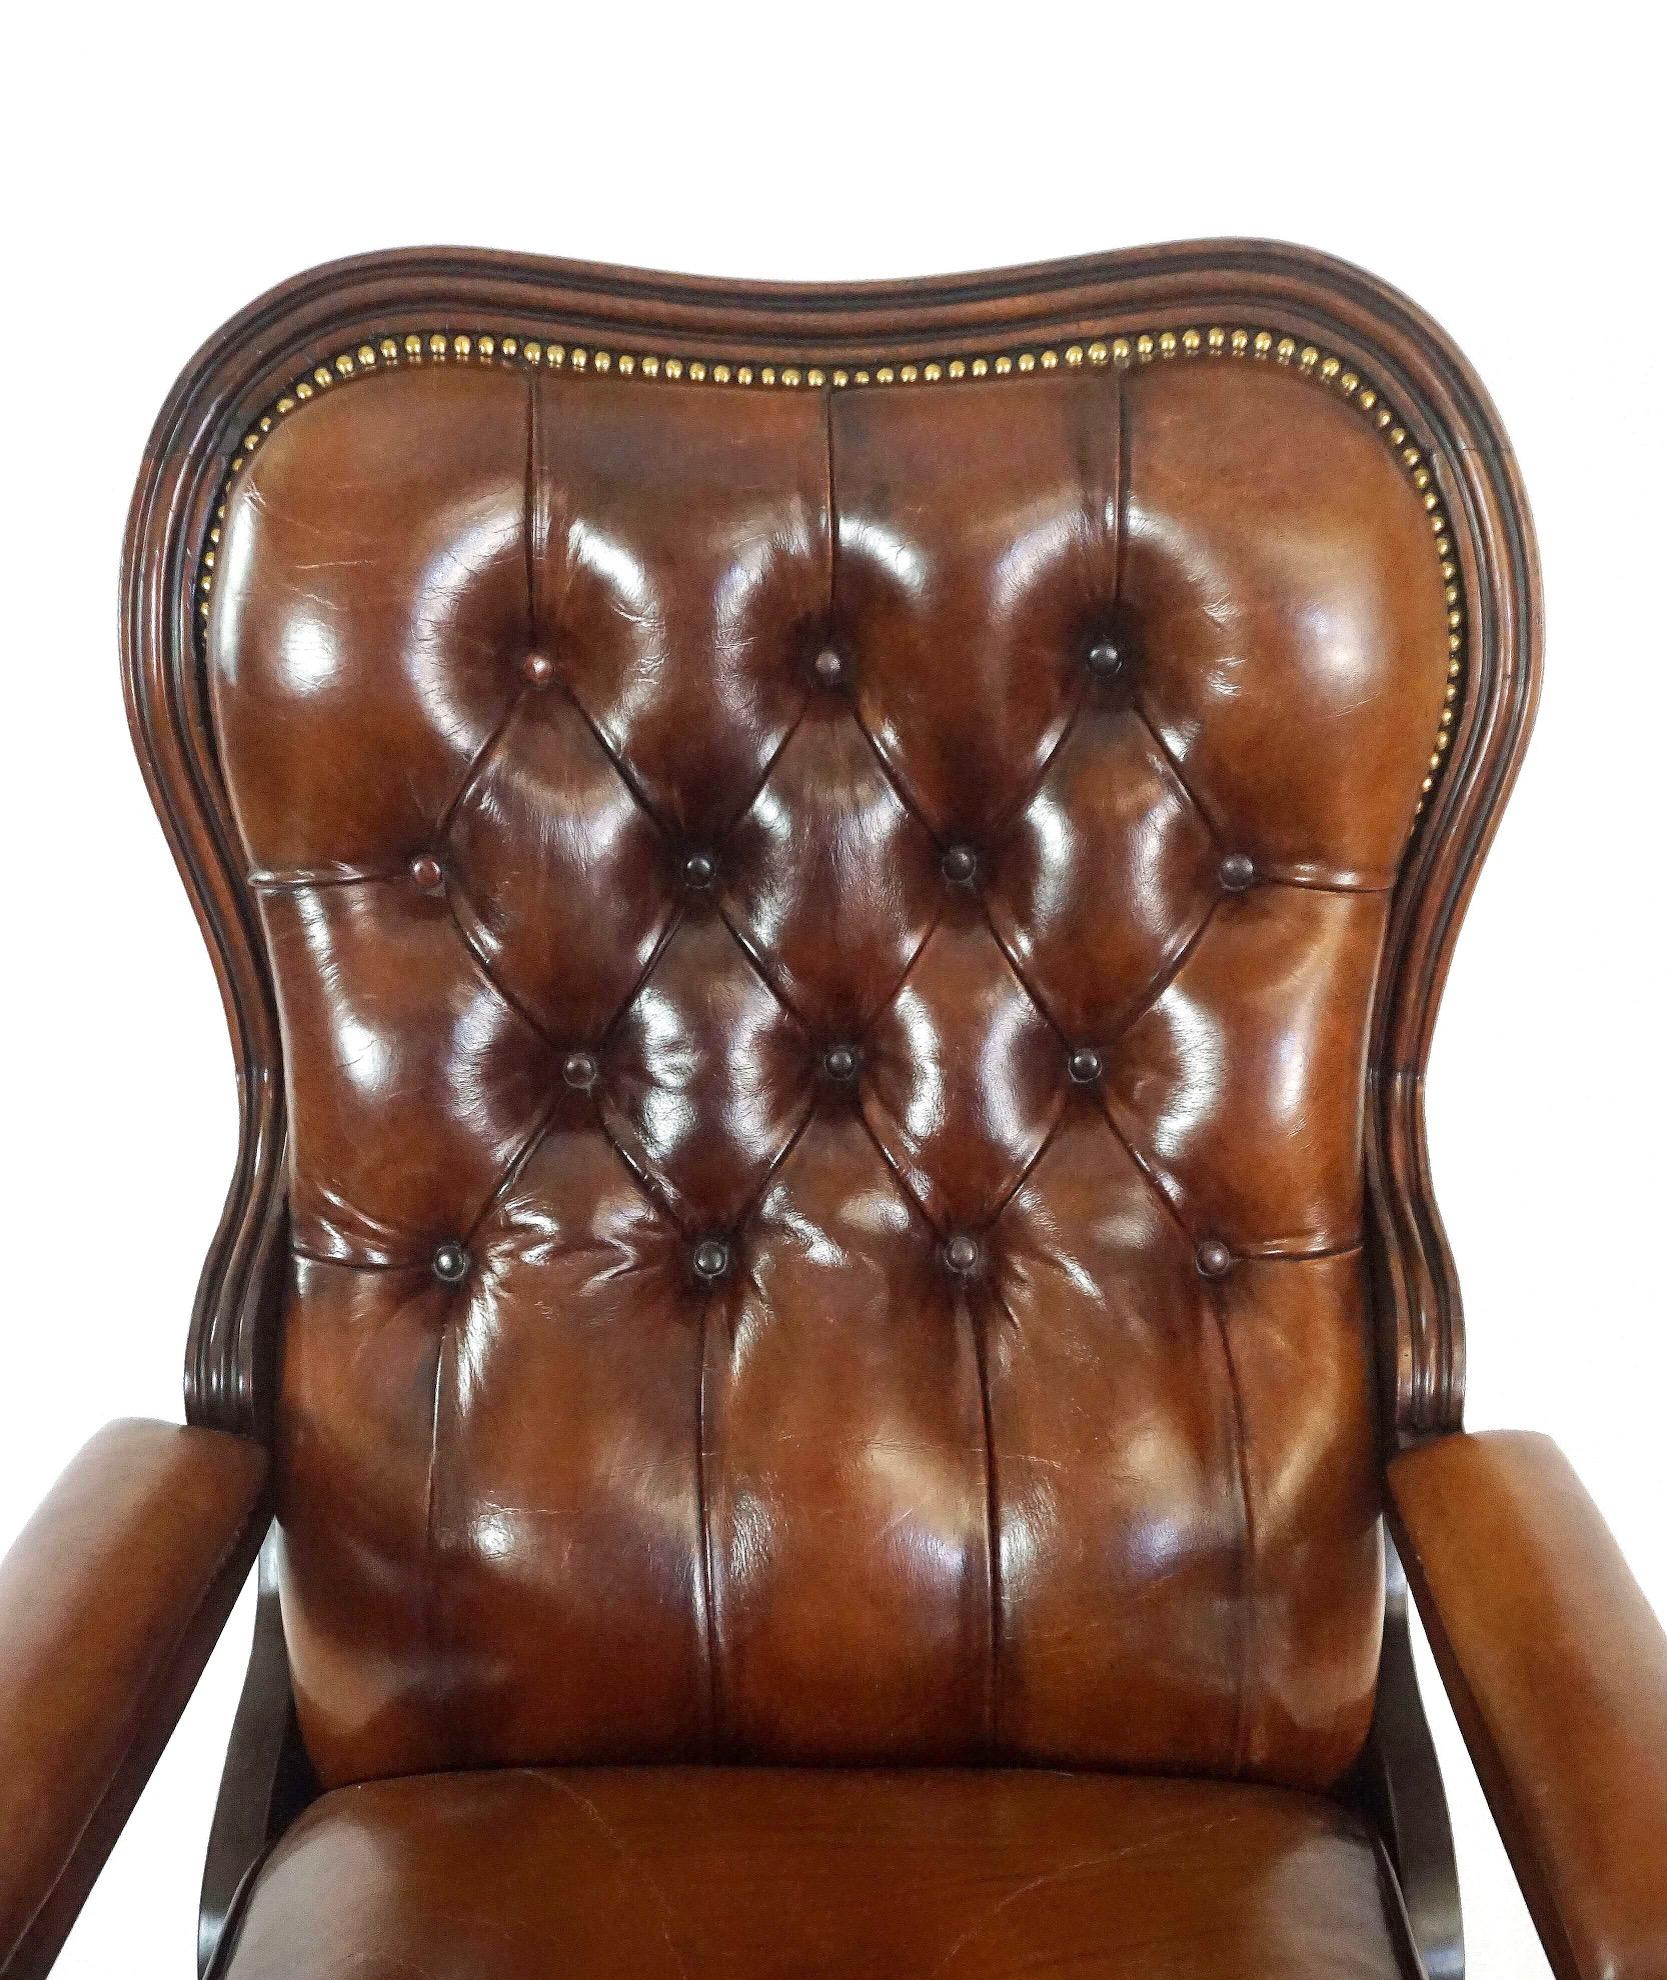 Regency Leather Upholstered Mahogany Reclining Armchair, circa 1830 For Sale 4